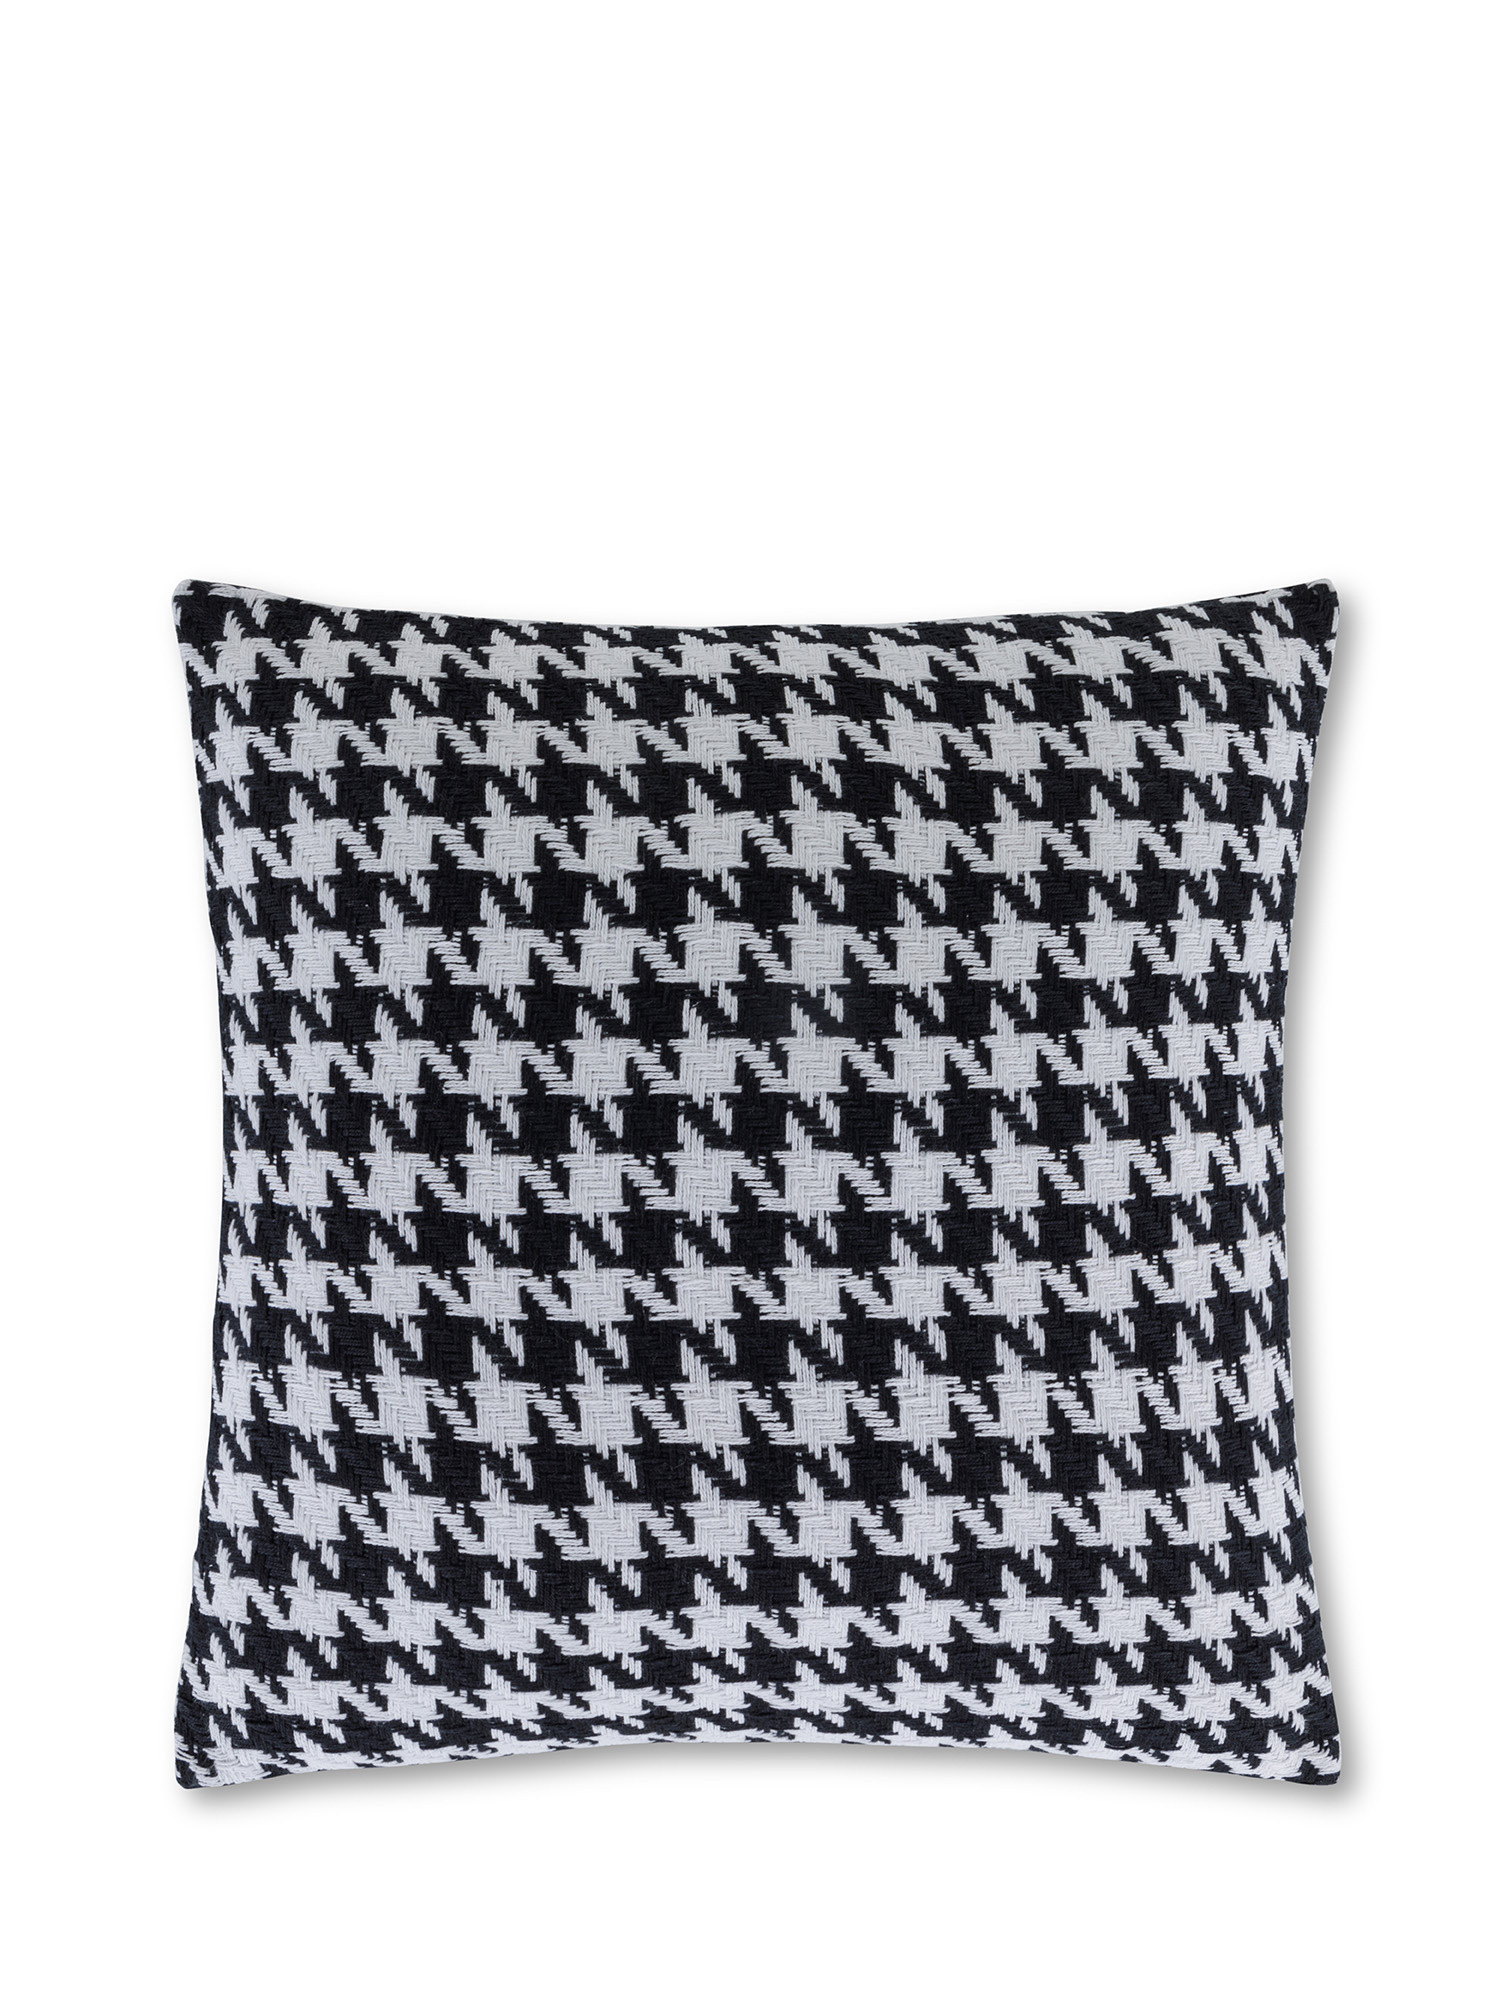 Jacquard fabric cushion with houndstooth motif 45x45 cm, Black, large image number 0